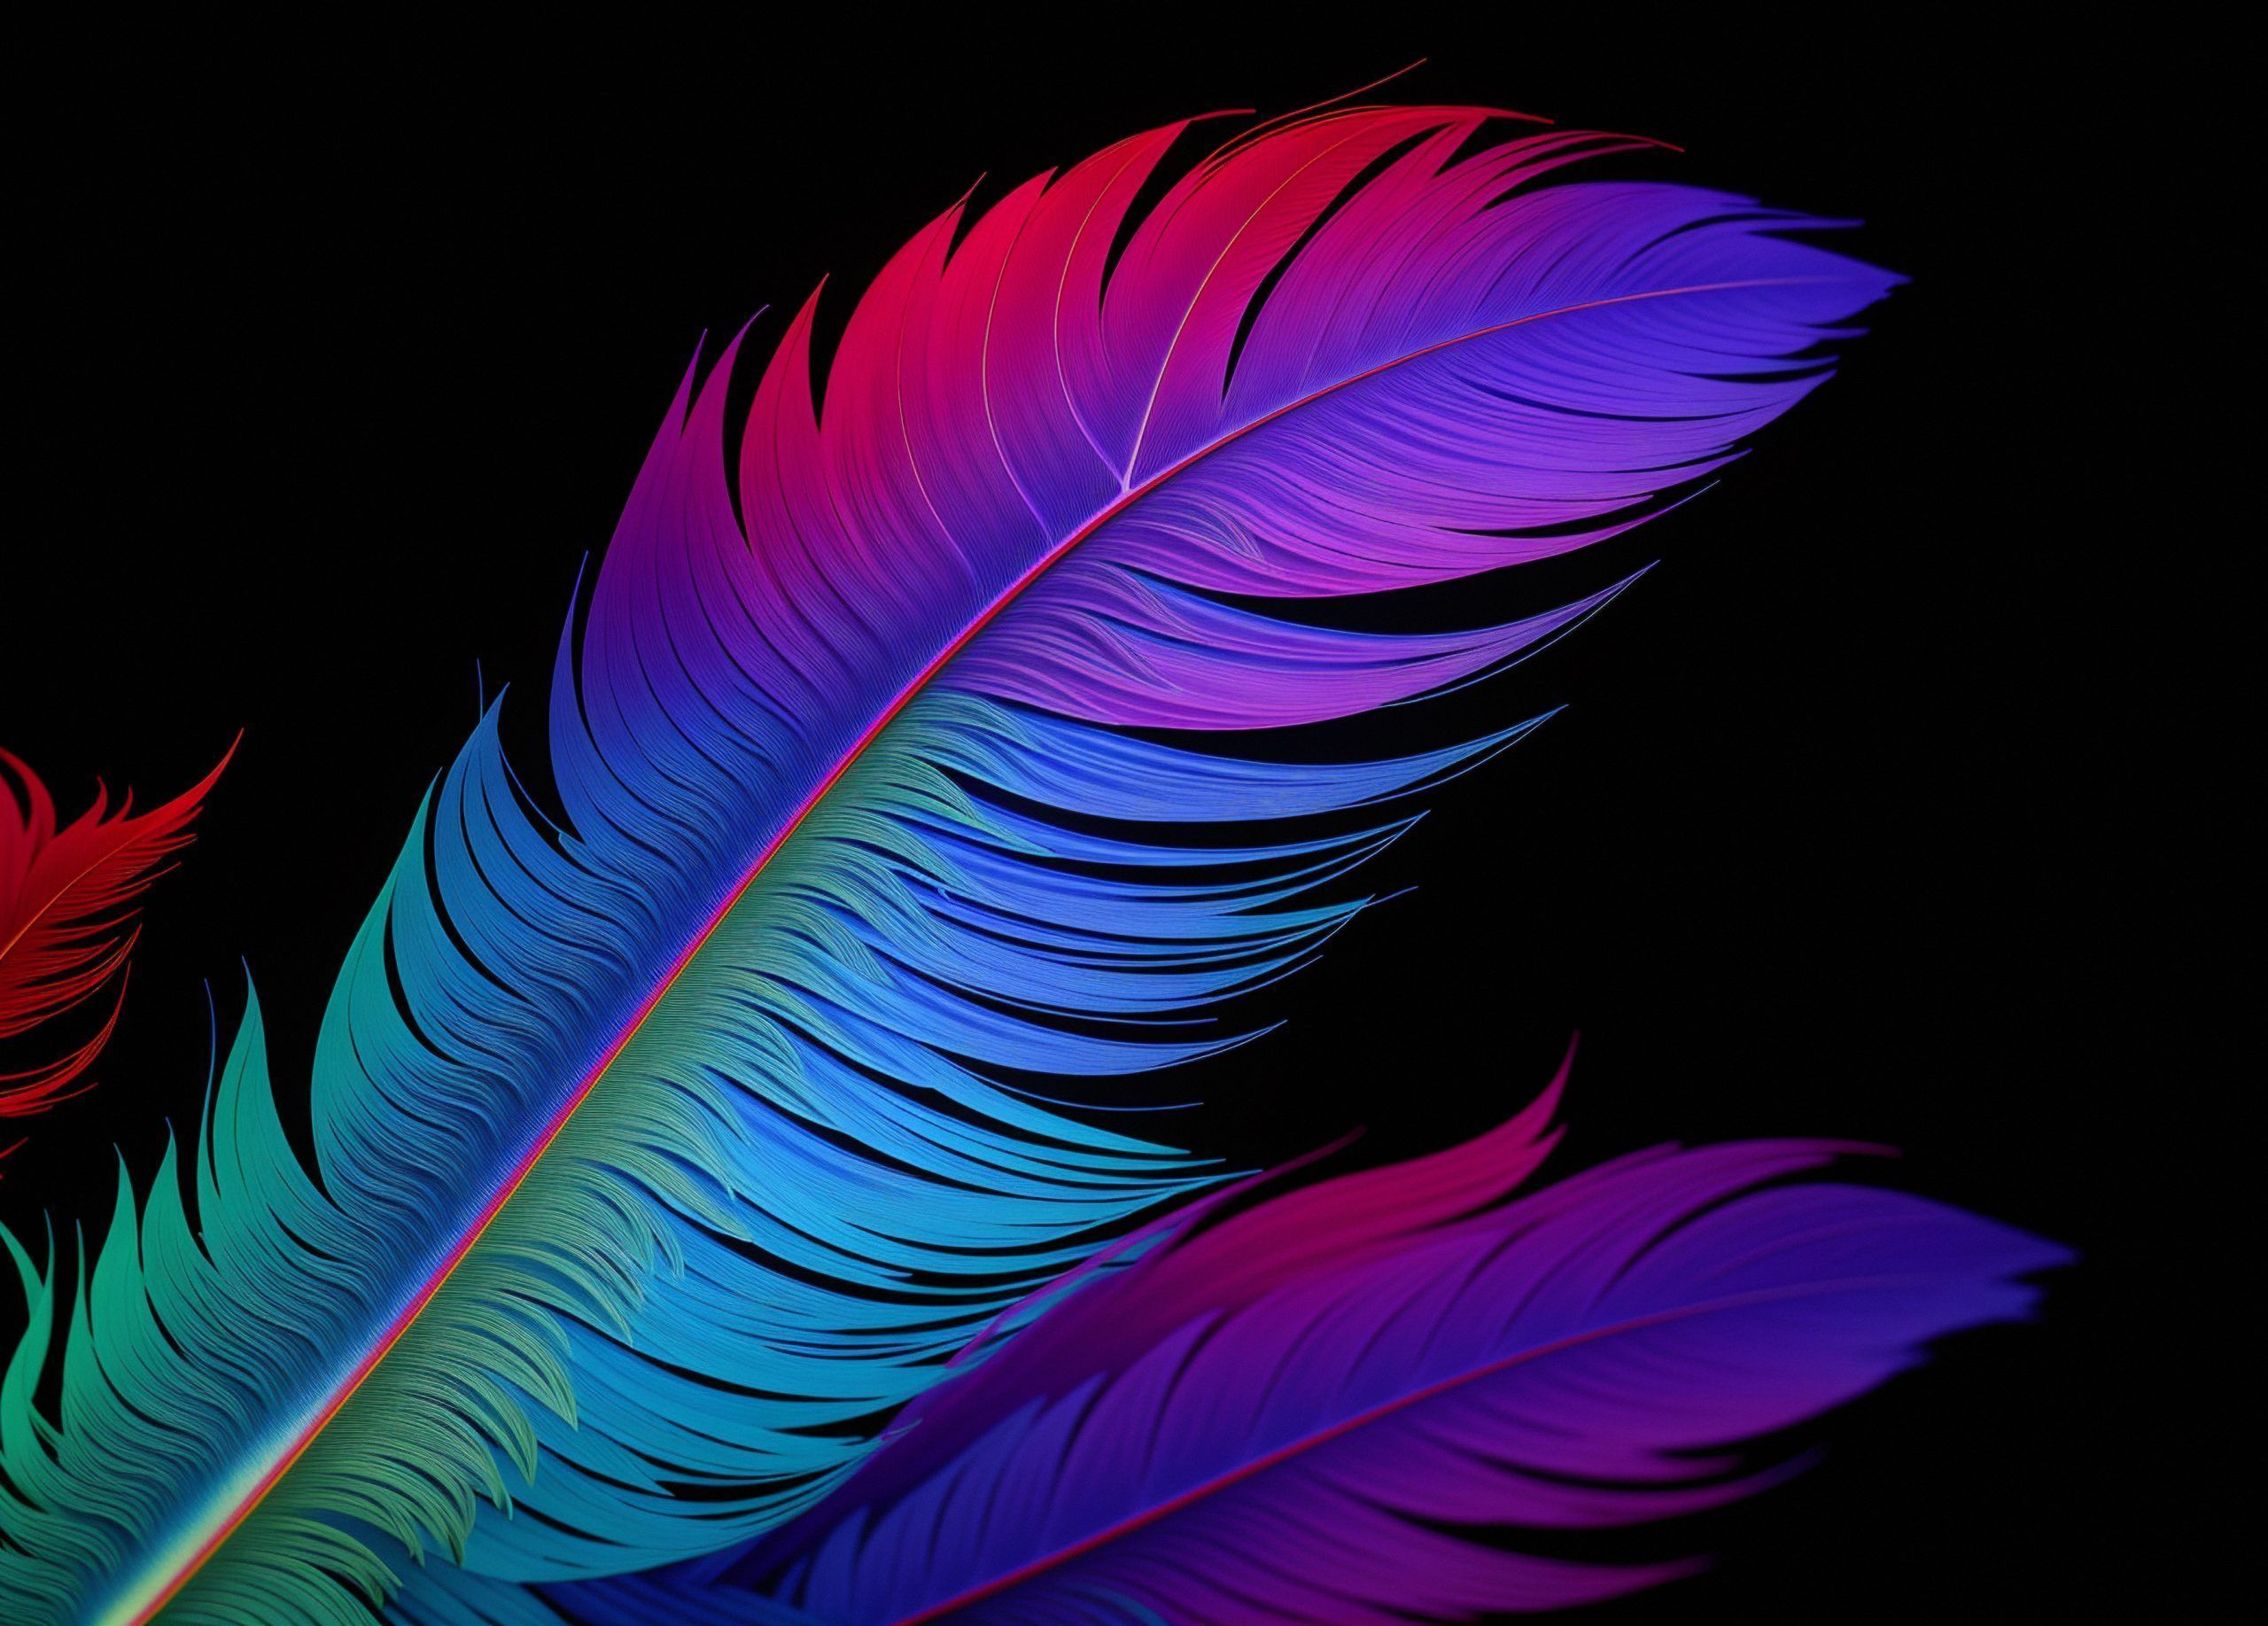 3D rendering of a colorful feather on a black background - Feathers